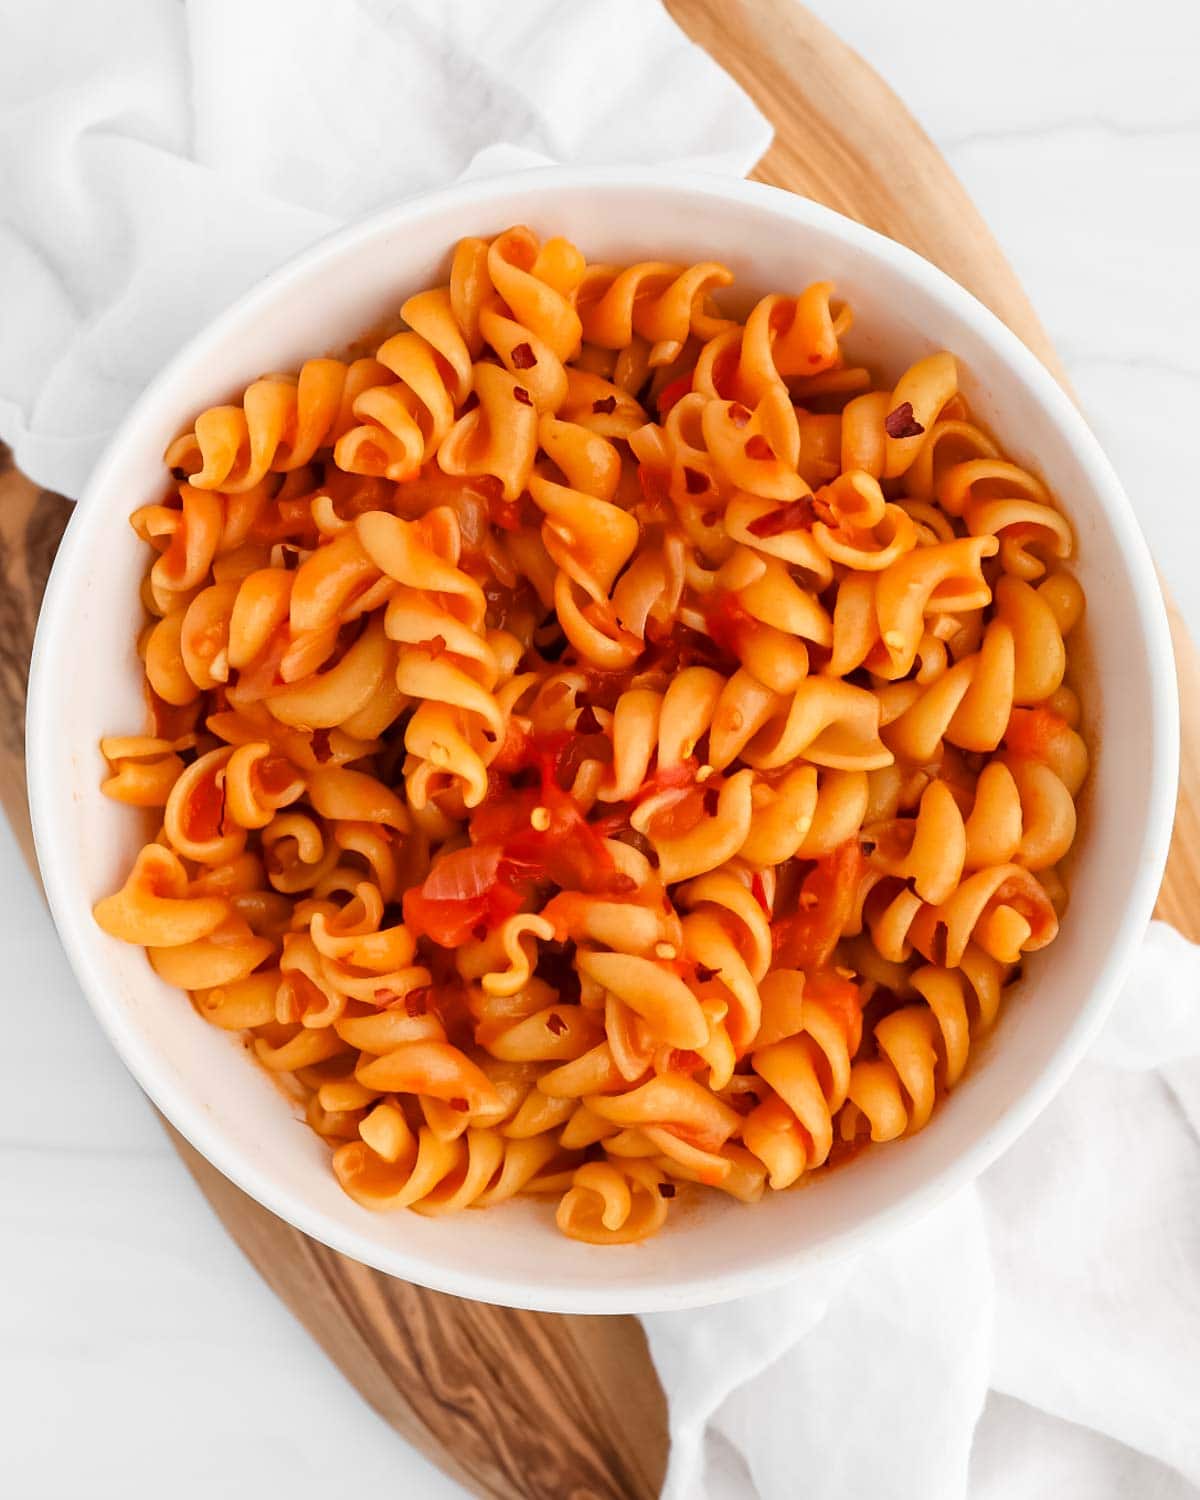 Pasta in a red sauce inside a white bowl.